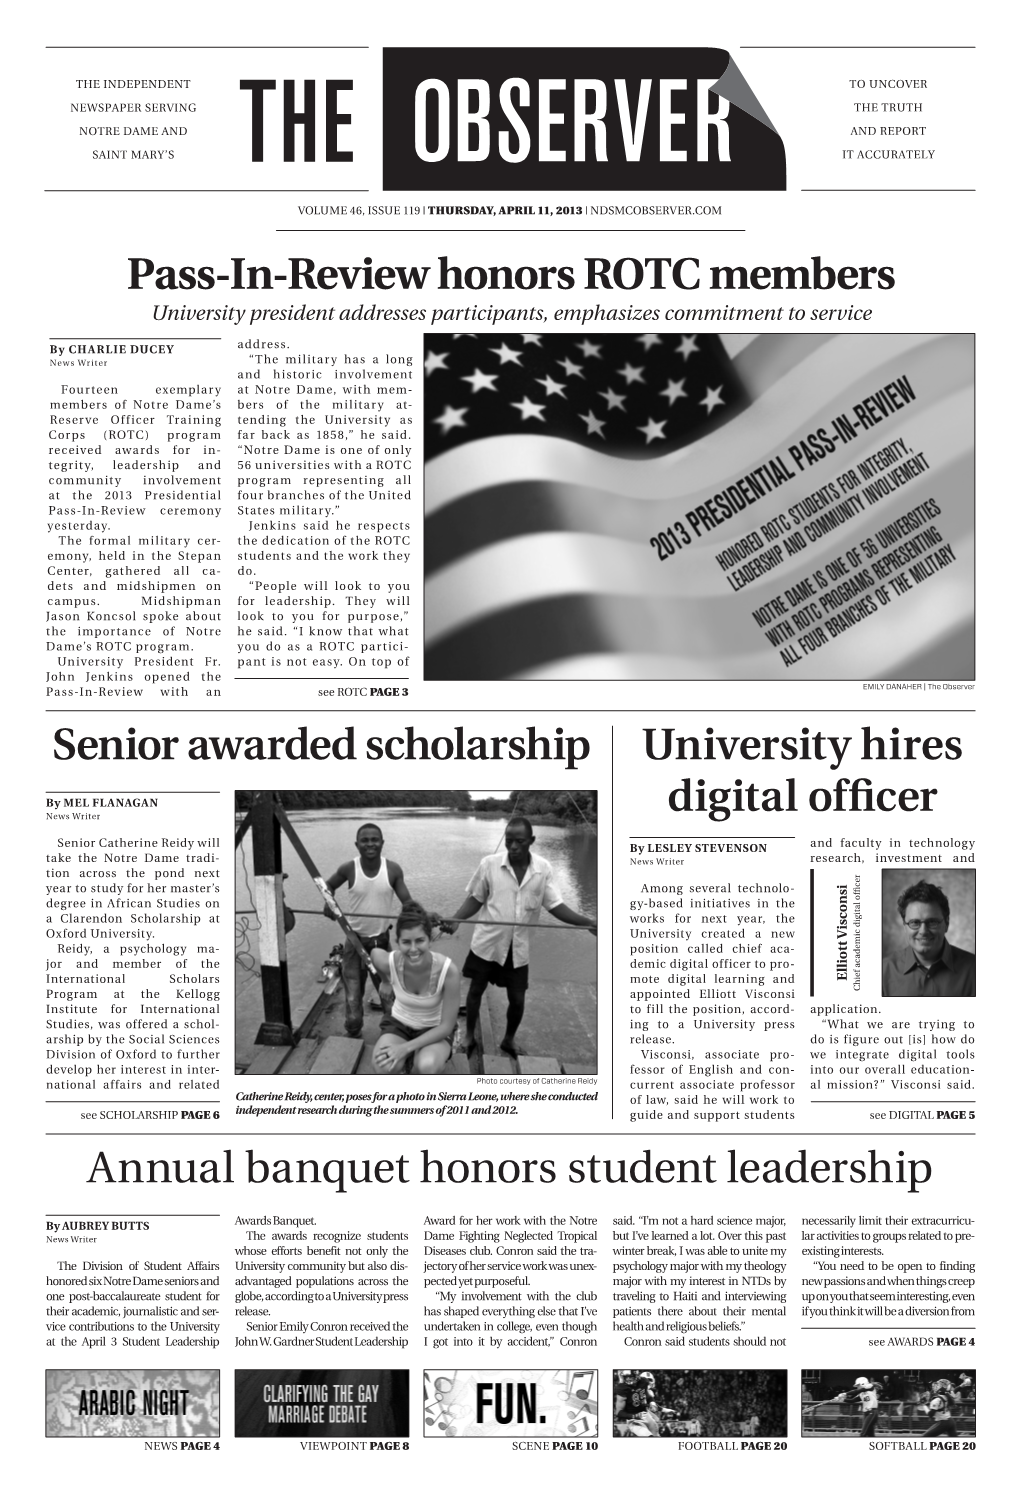 Pass-In-Review Honors ROTC Members Senior Awarded